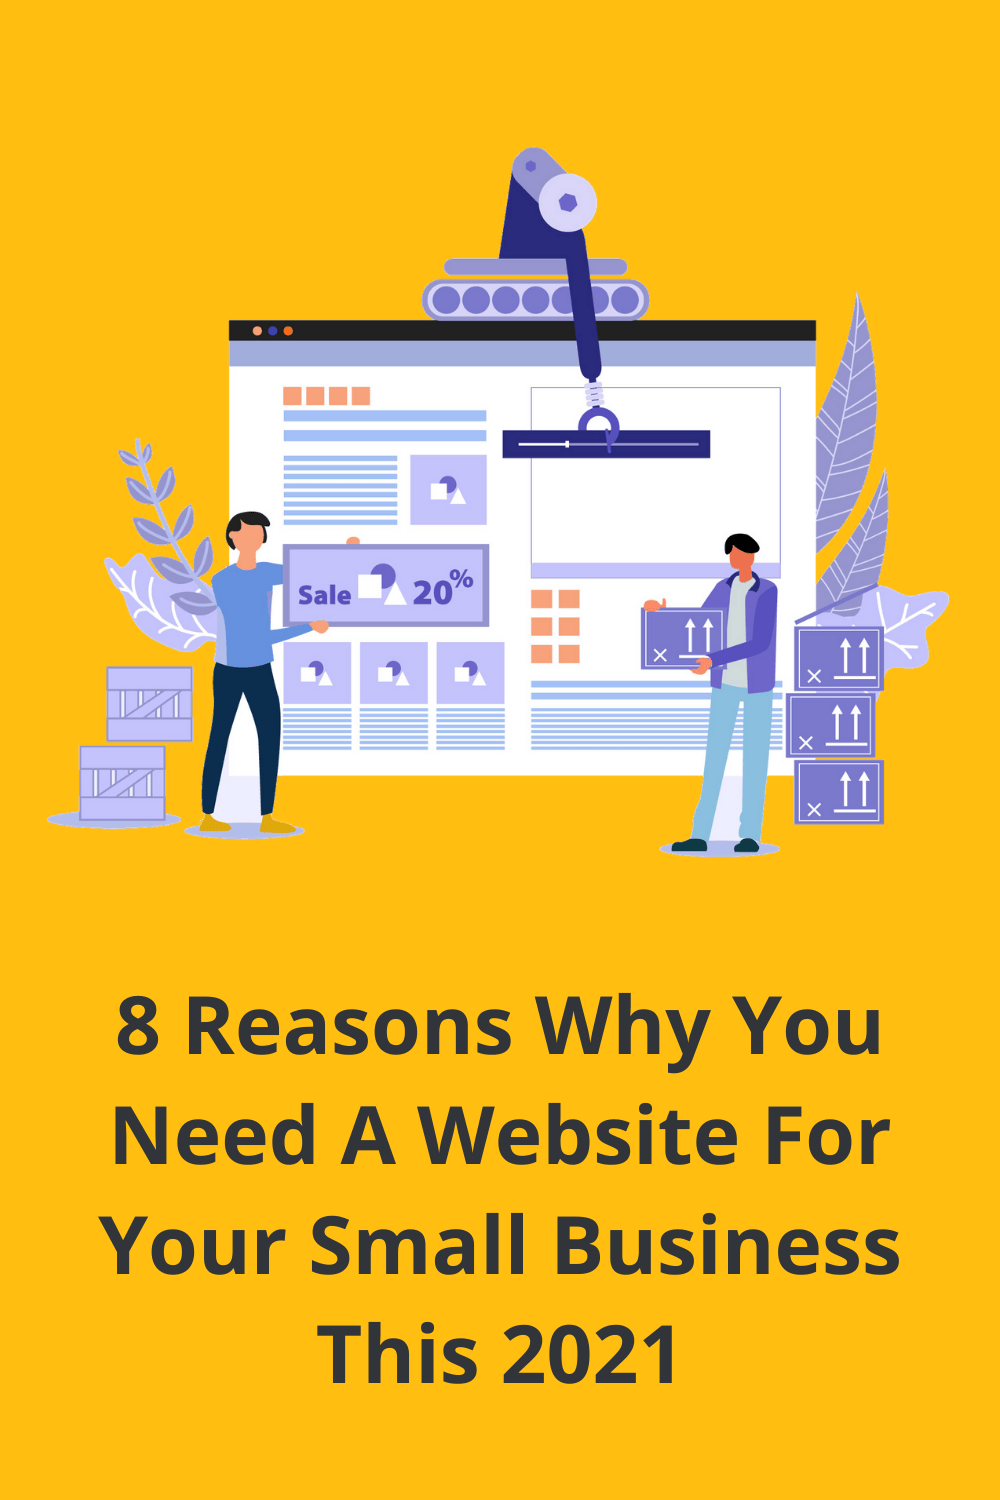 Having an online presence is essential especially for a growing business. Be visibly present in the virtual world by investing in a good website. via @scopedesign